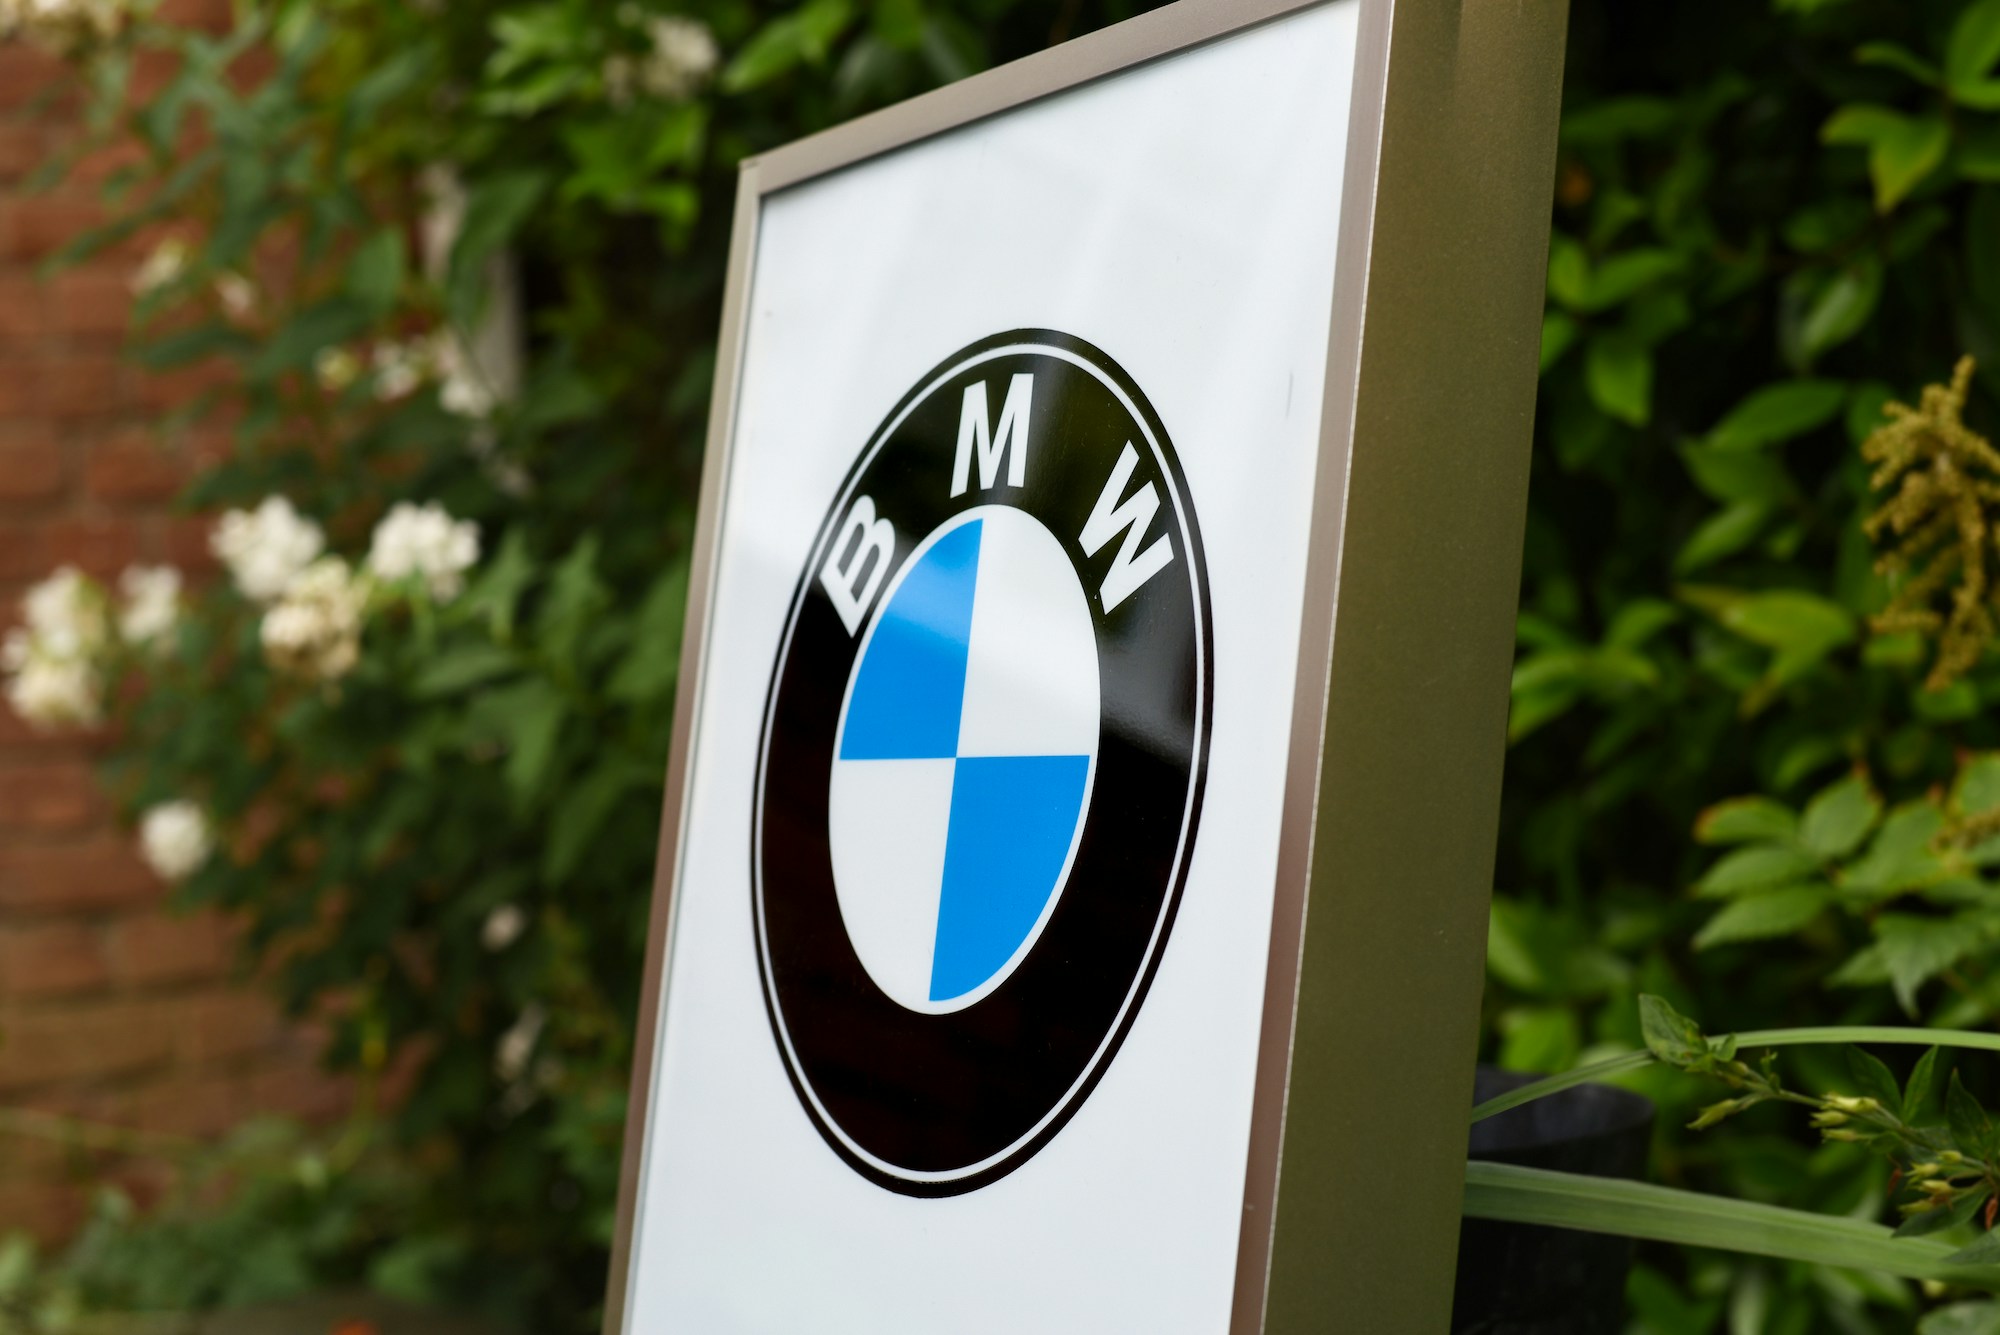 BMW M POWER ILLUMINATED SIGN for sale by auction in Thatcham